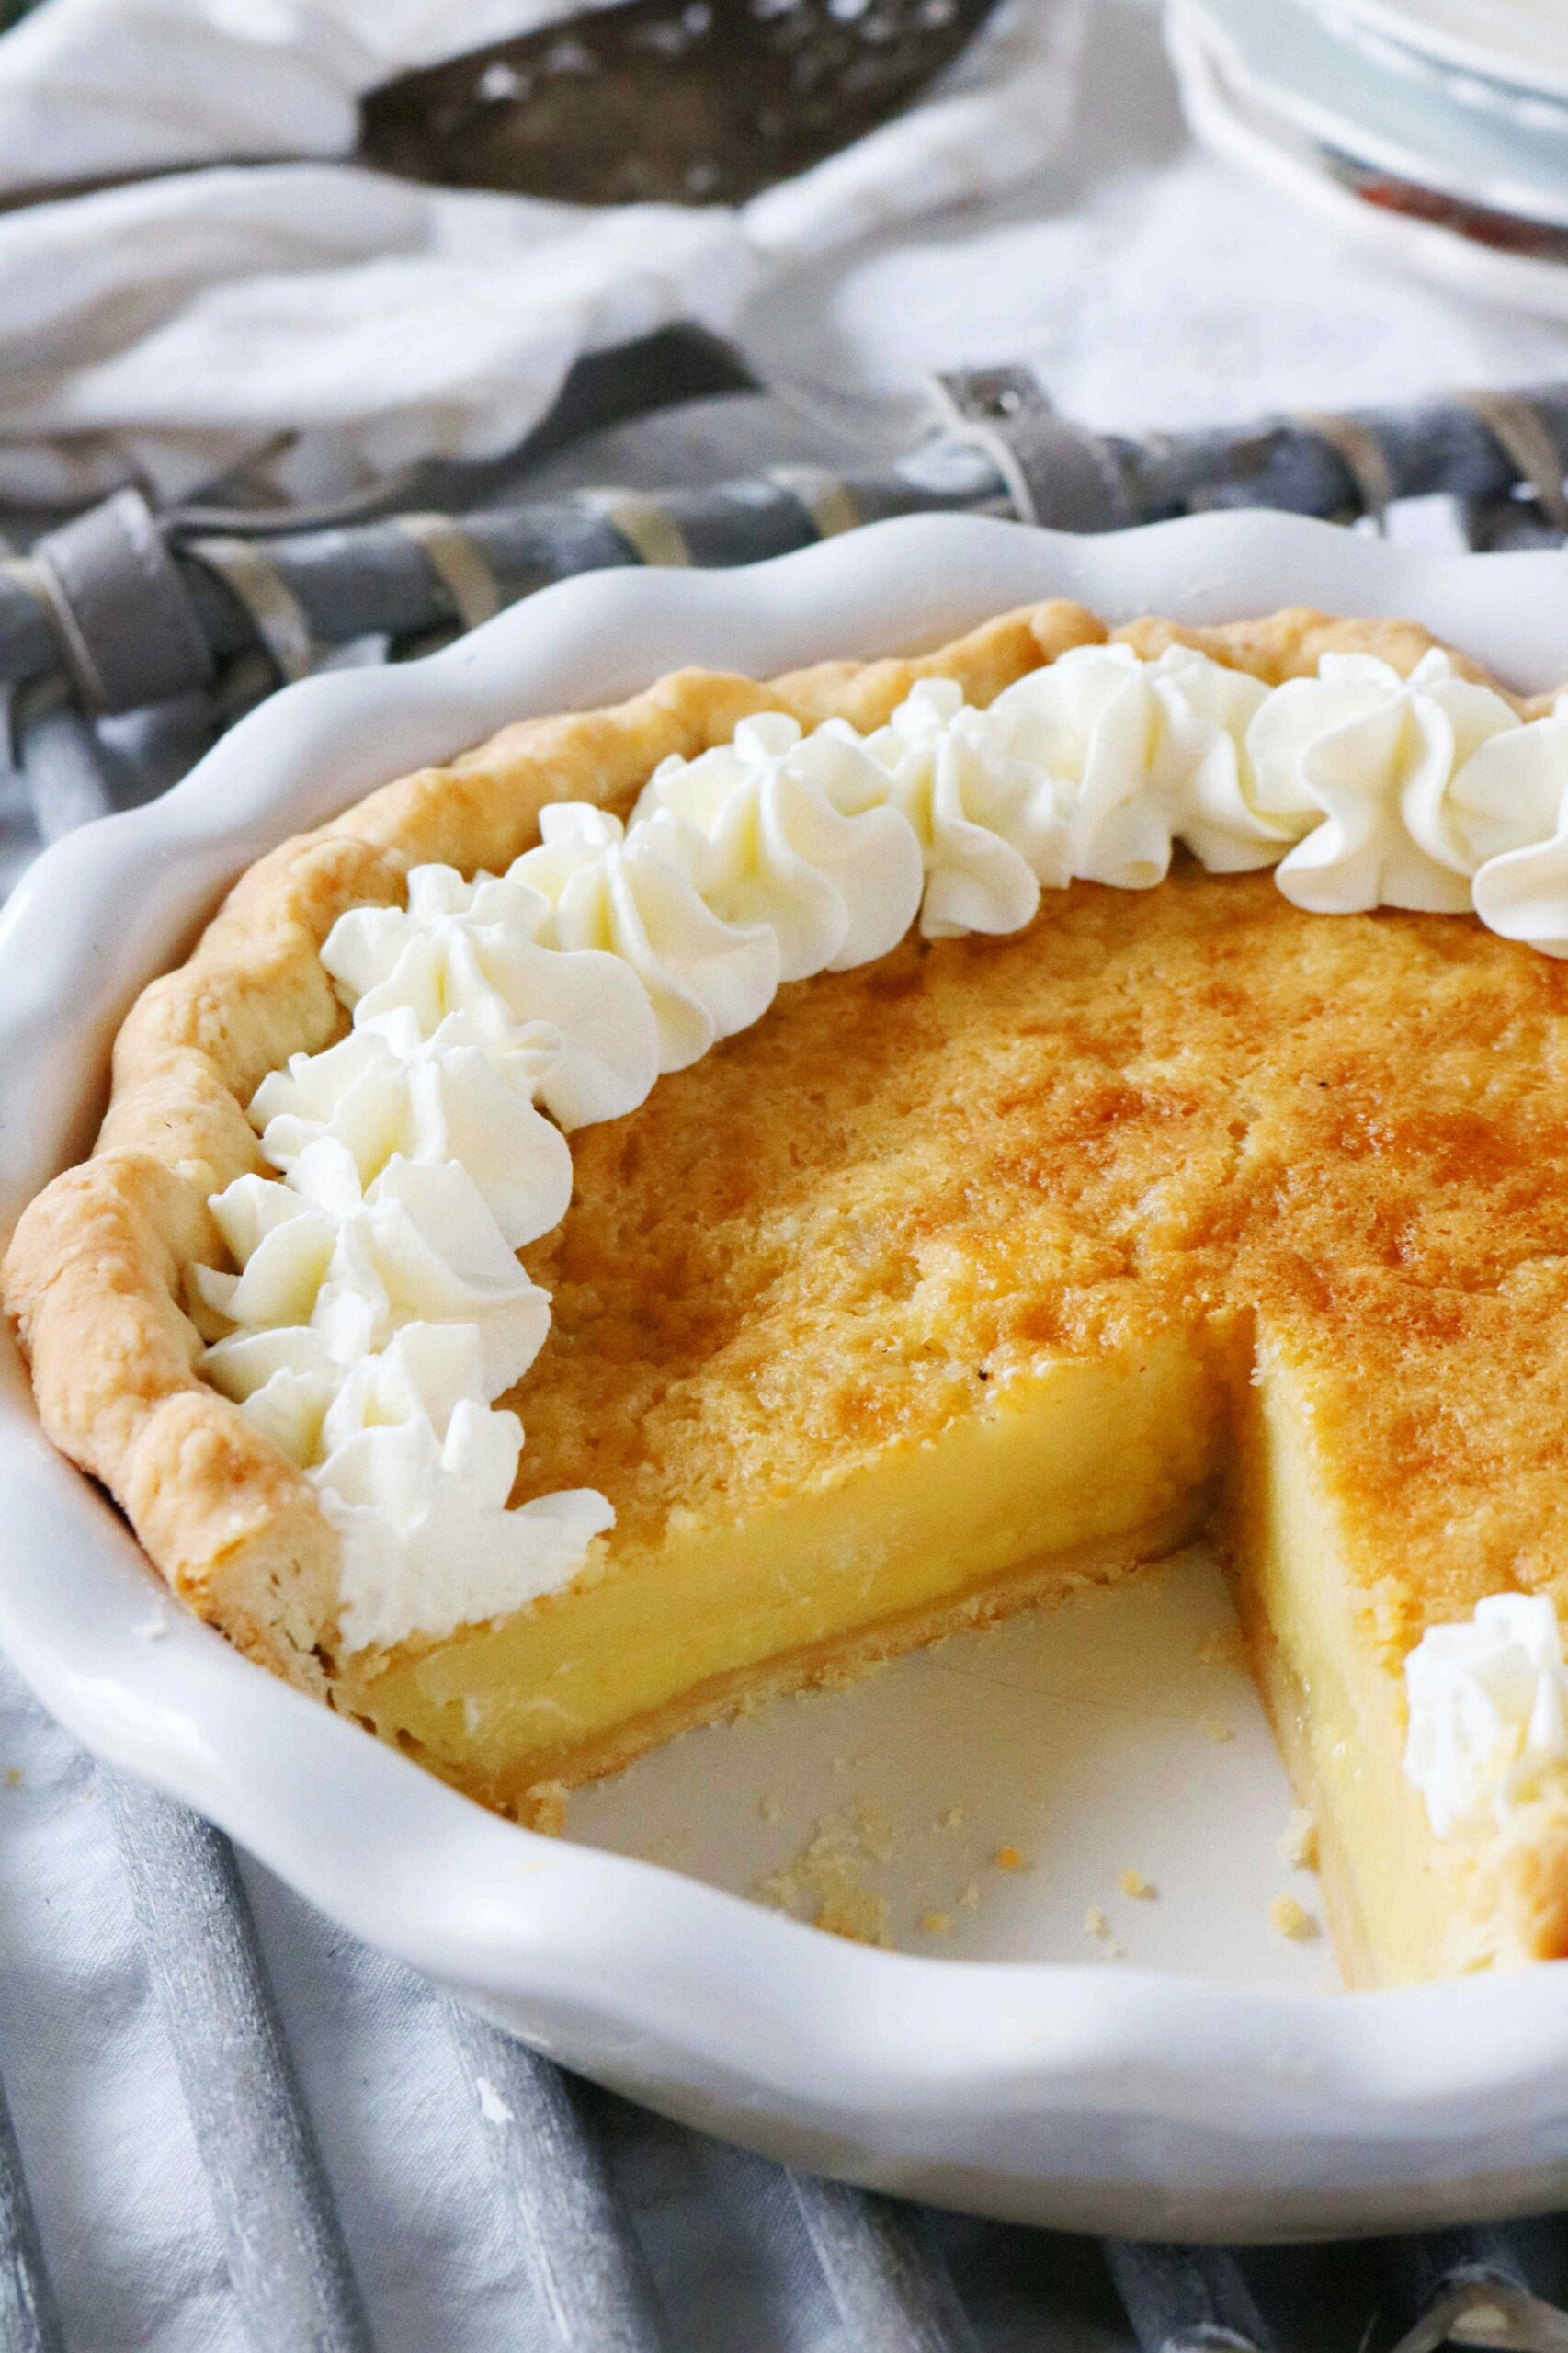  A pie that'll make you want seconds.